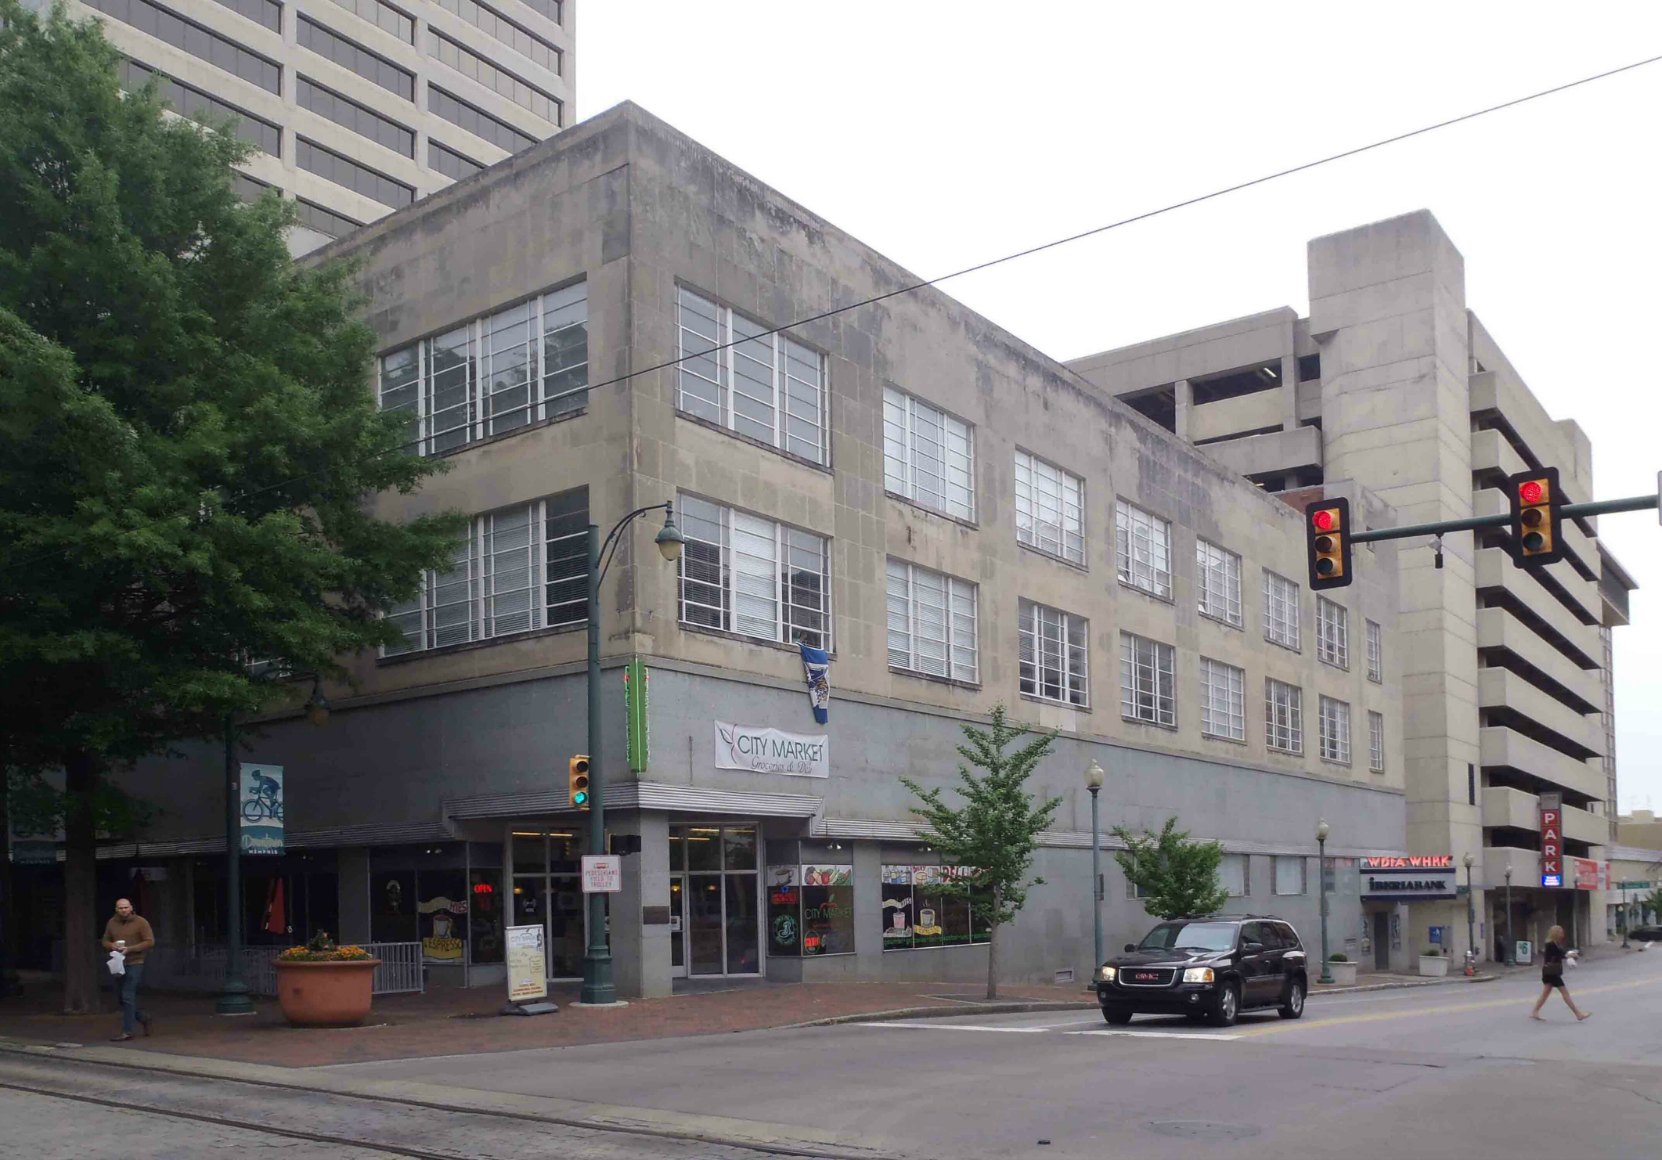 The WDIA radio station is in this building on Union Avenue in downtown Memphis, Tennessee